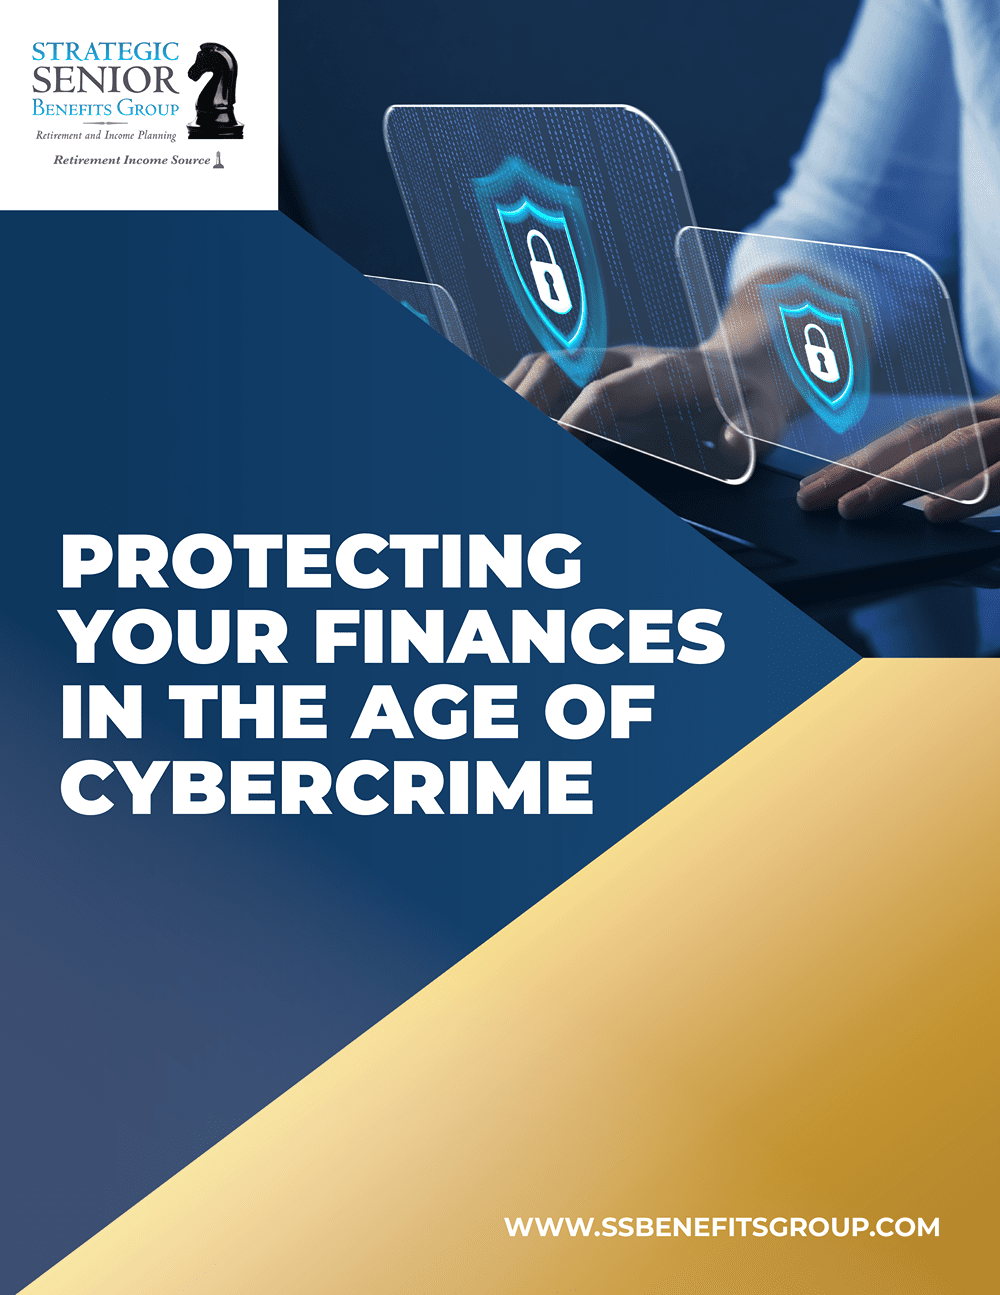 Strategic Senior Benefits Group - Protecting Your Finances in the Age of Cybercrime-1